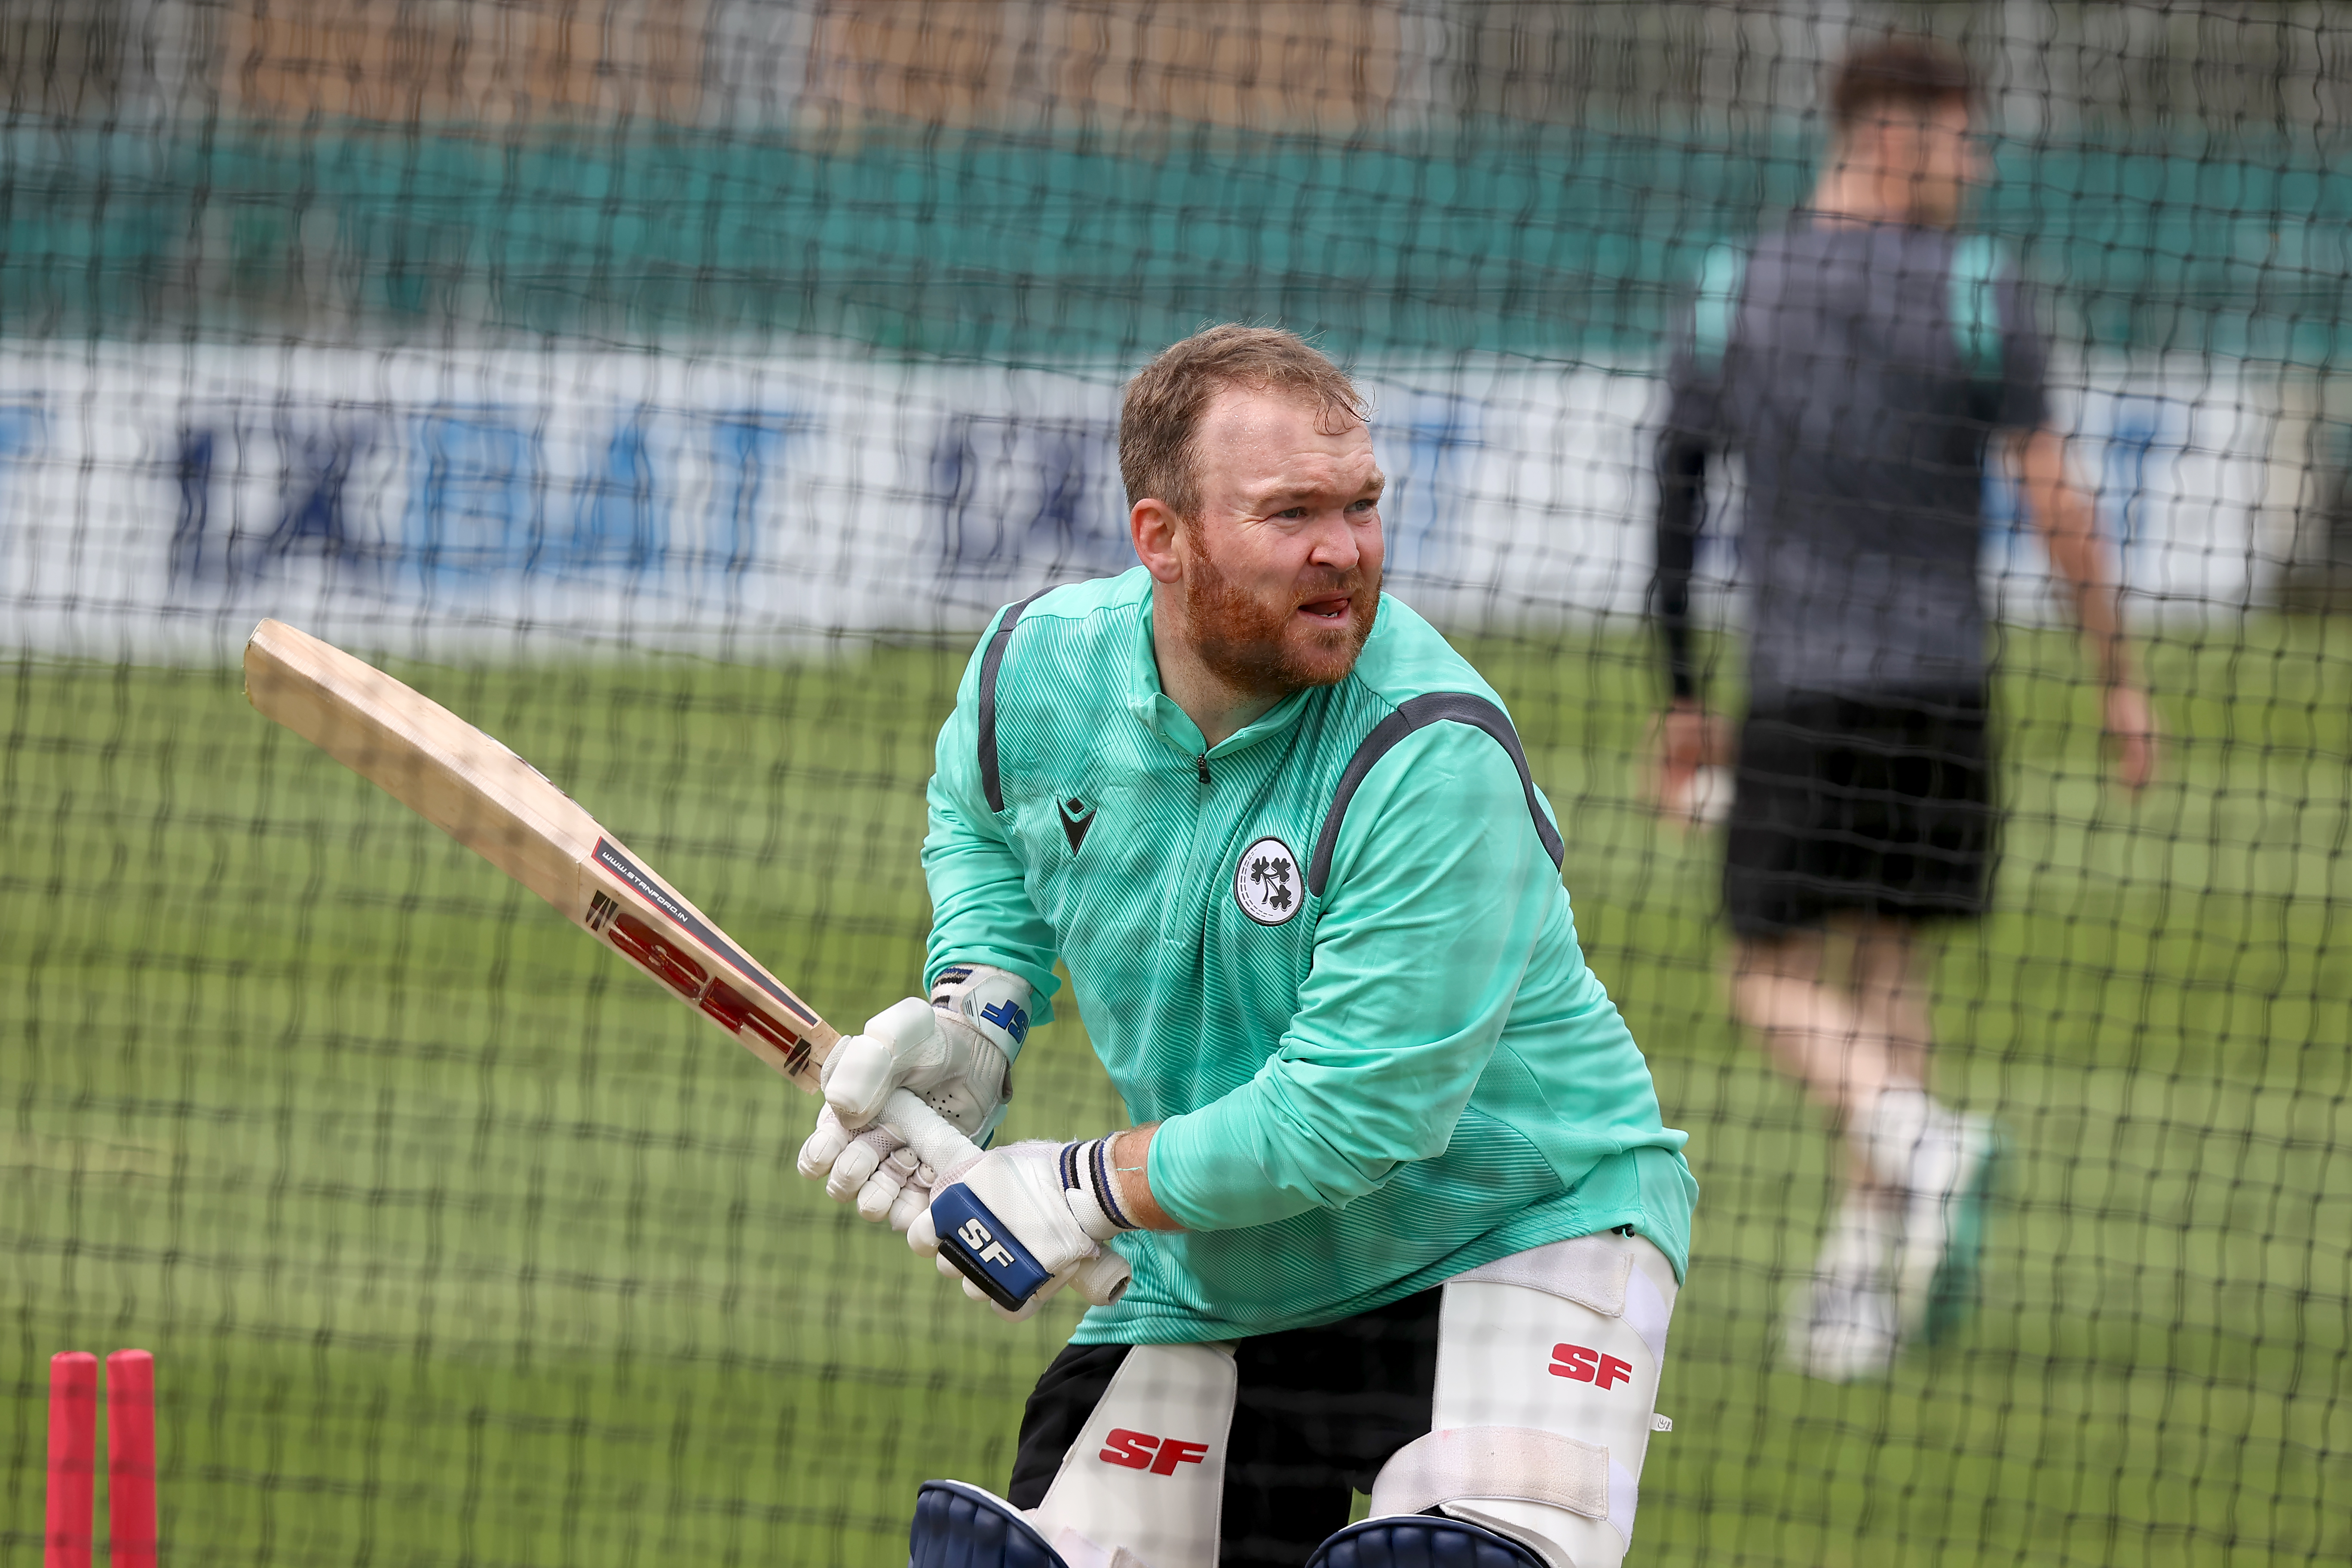 Cricket Ireland: Ireland captain Paul Stirling looking for further success in ODI series against Zimbabwe